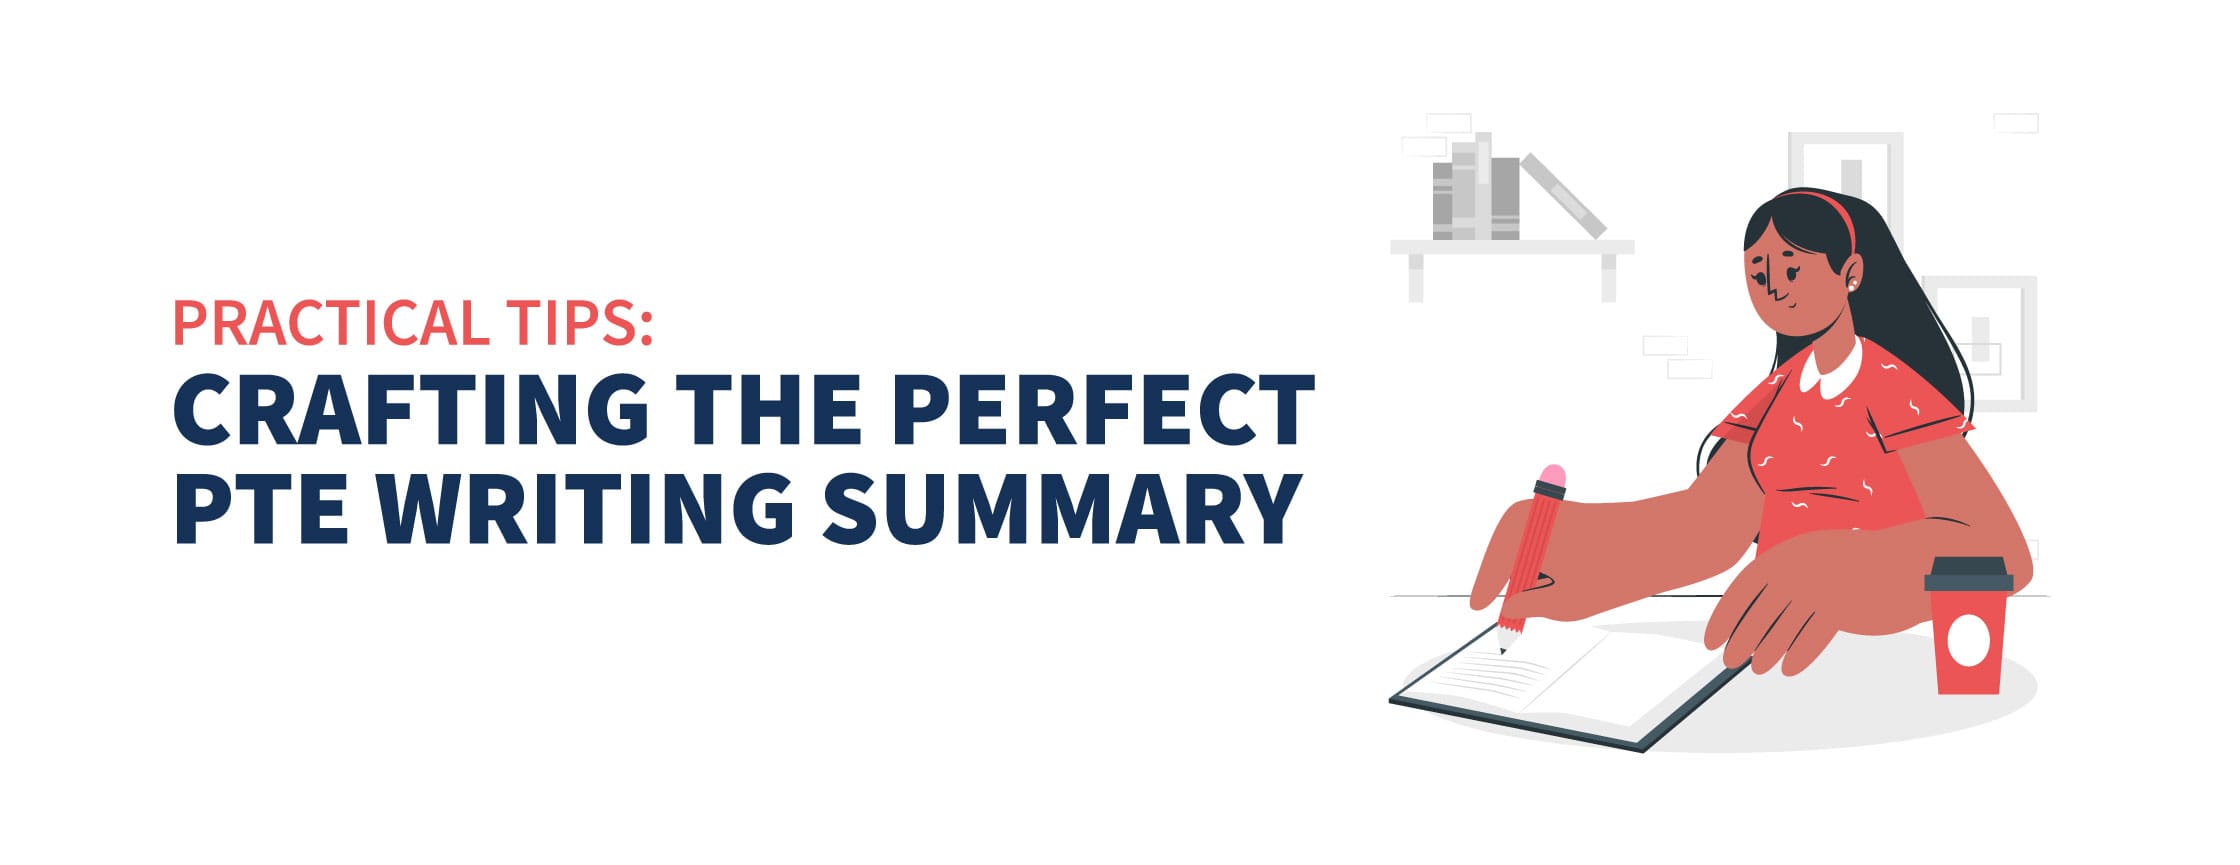 Practical Tips: Crafting the Perfect PTE Writing Summary